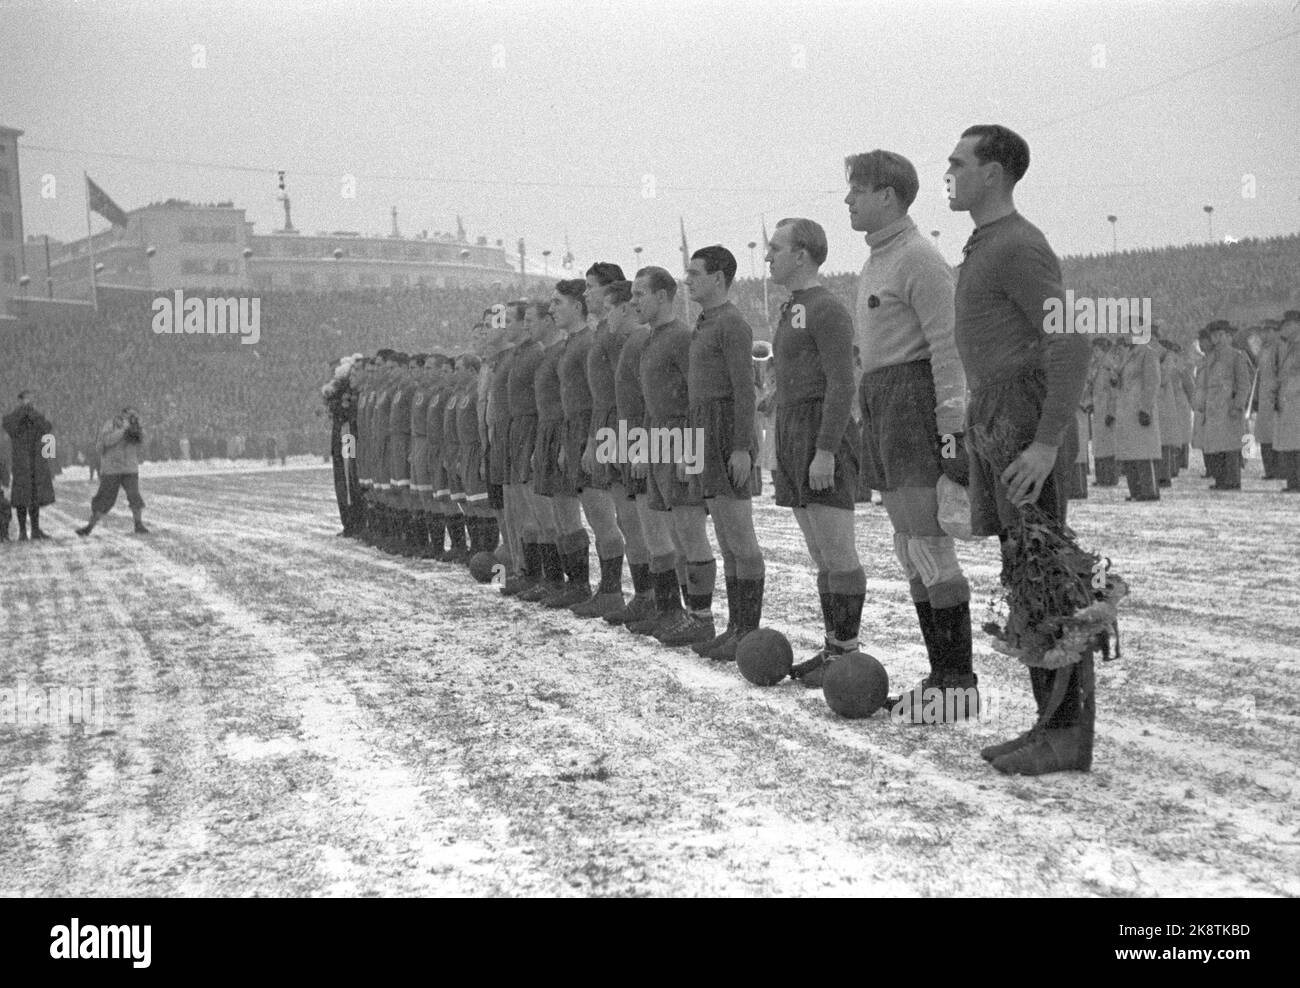 Oslo 19471109 Dynamo - Skeid on winter driving Football match between Dynamo - Skeid 7-0, at Bislett. Team picture. Snow on the track. Photo; Current / NTB Stock Photo